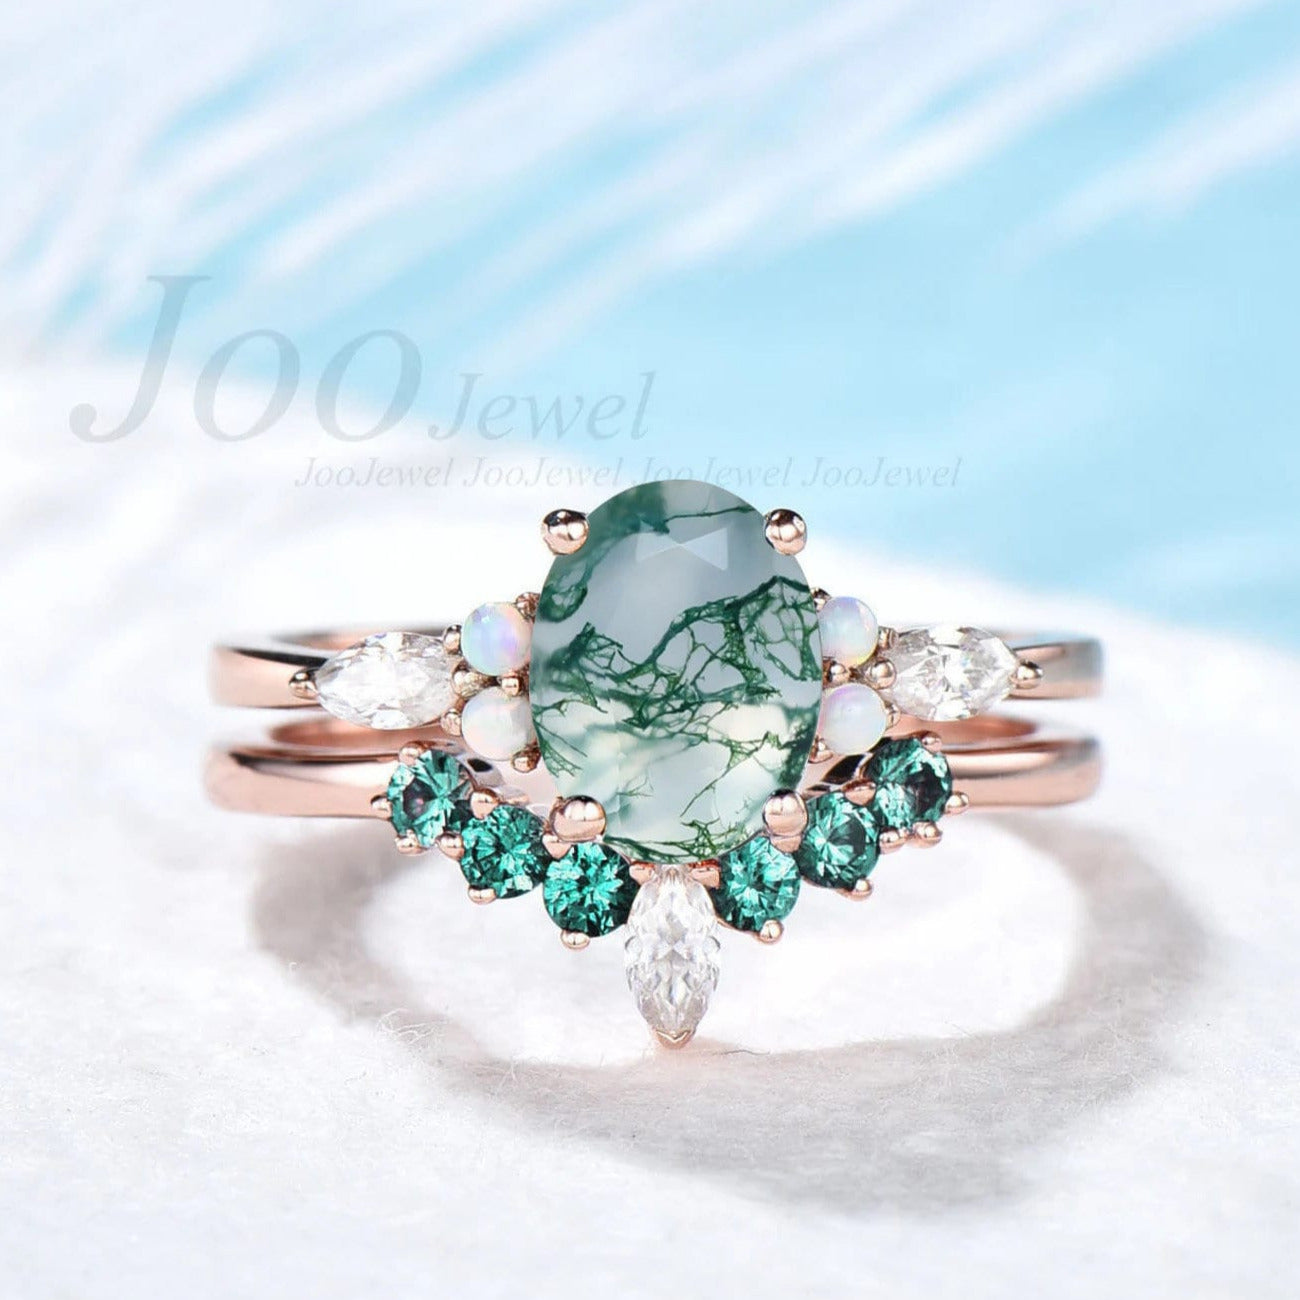 Oval Cut Natural Moss Agate Engagement Ring Set Green Gemstone Jewelry Opal Emerald Wedding Band Crystal Bridal Ring Unique Gift for Her